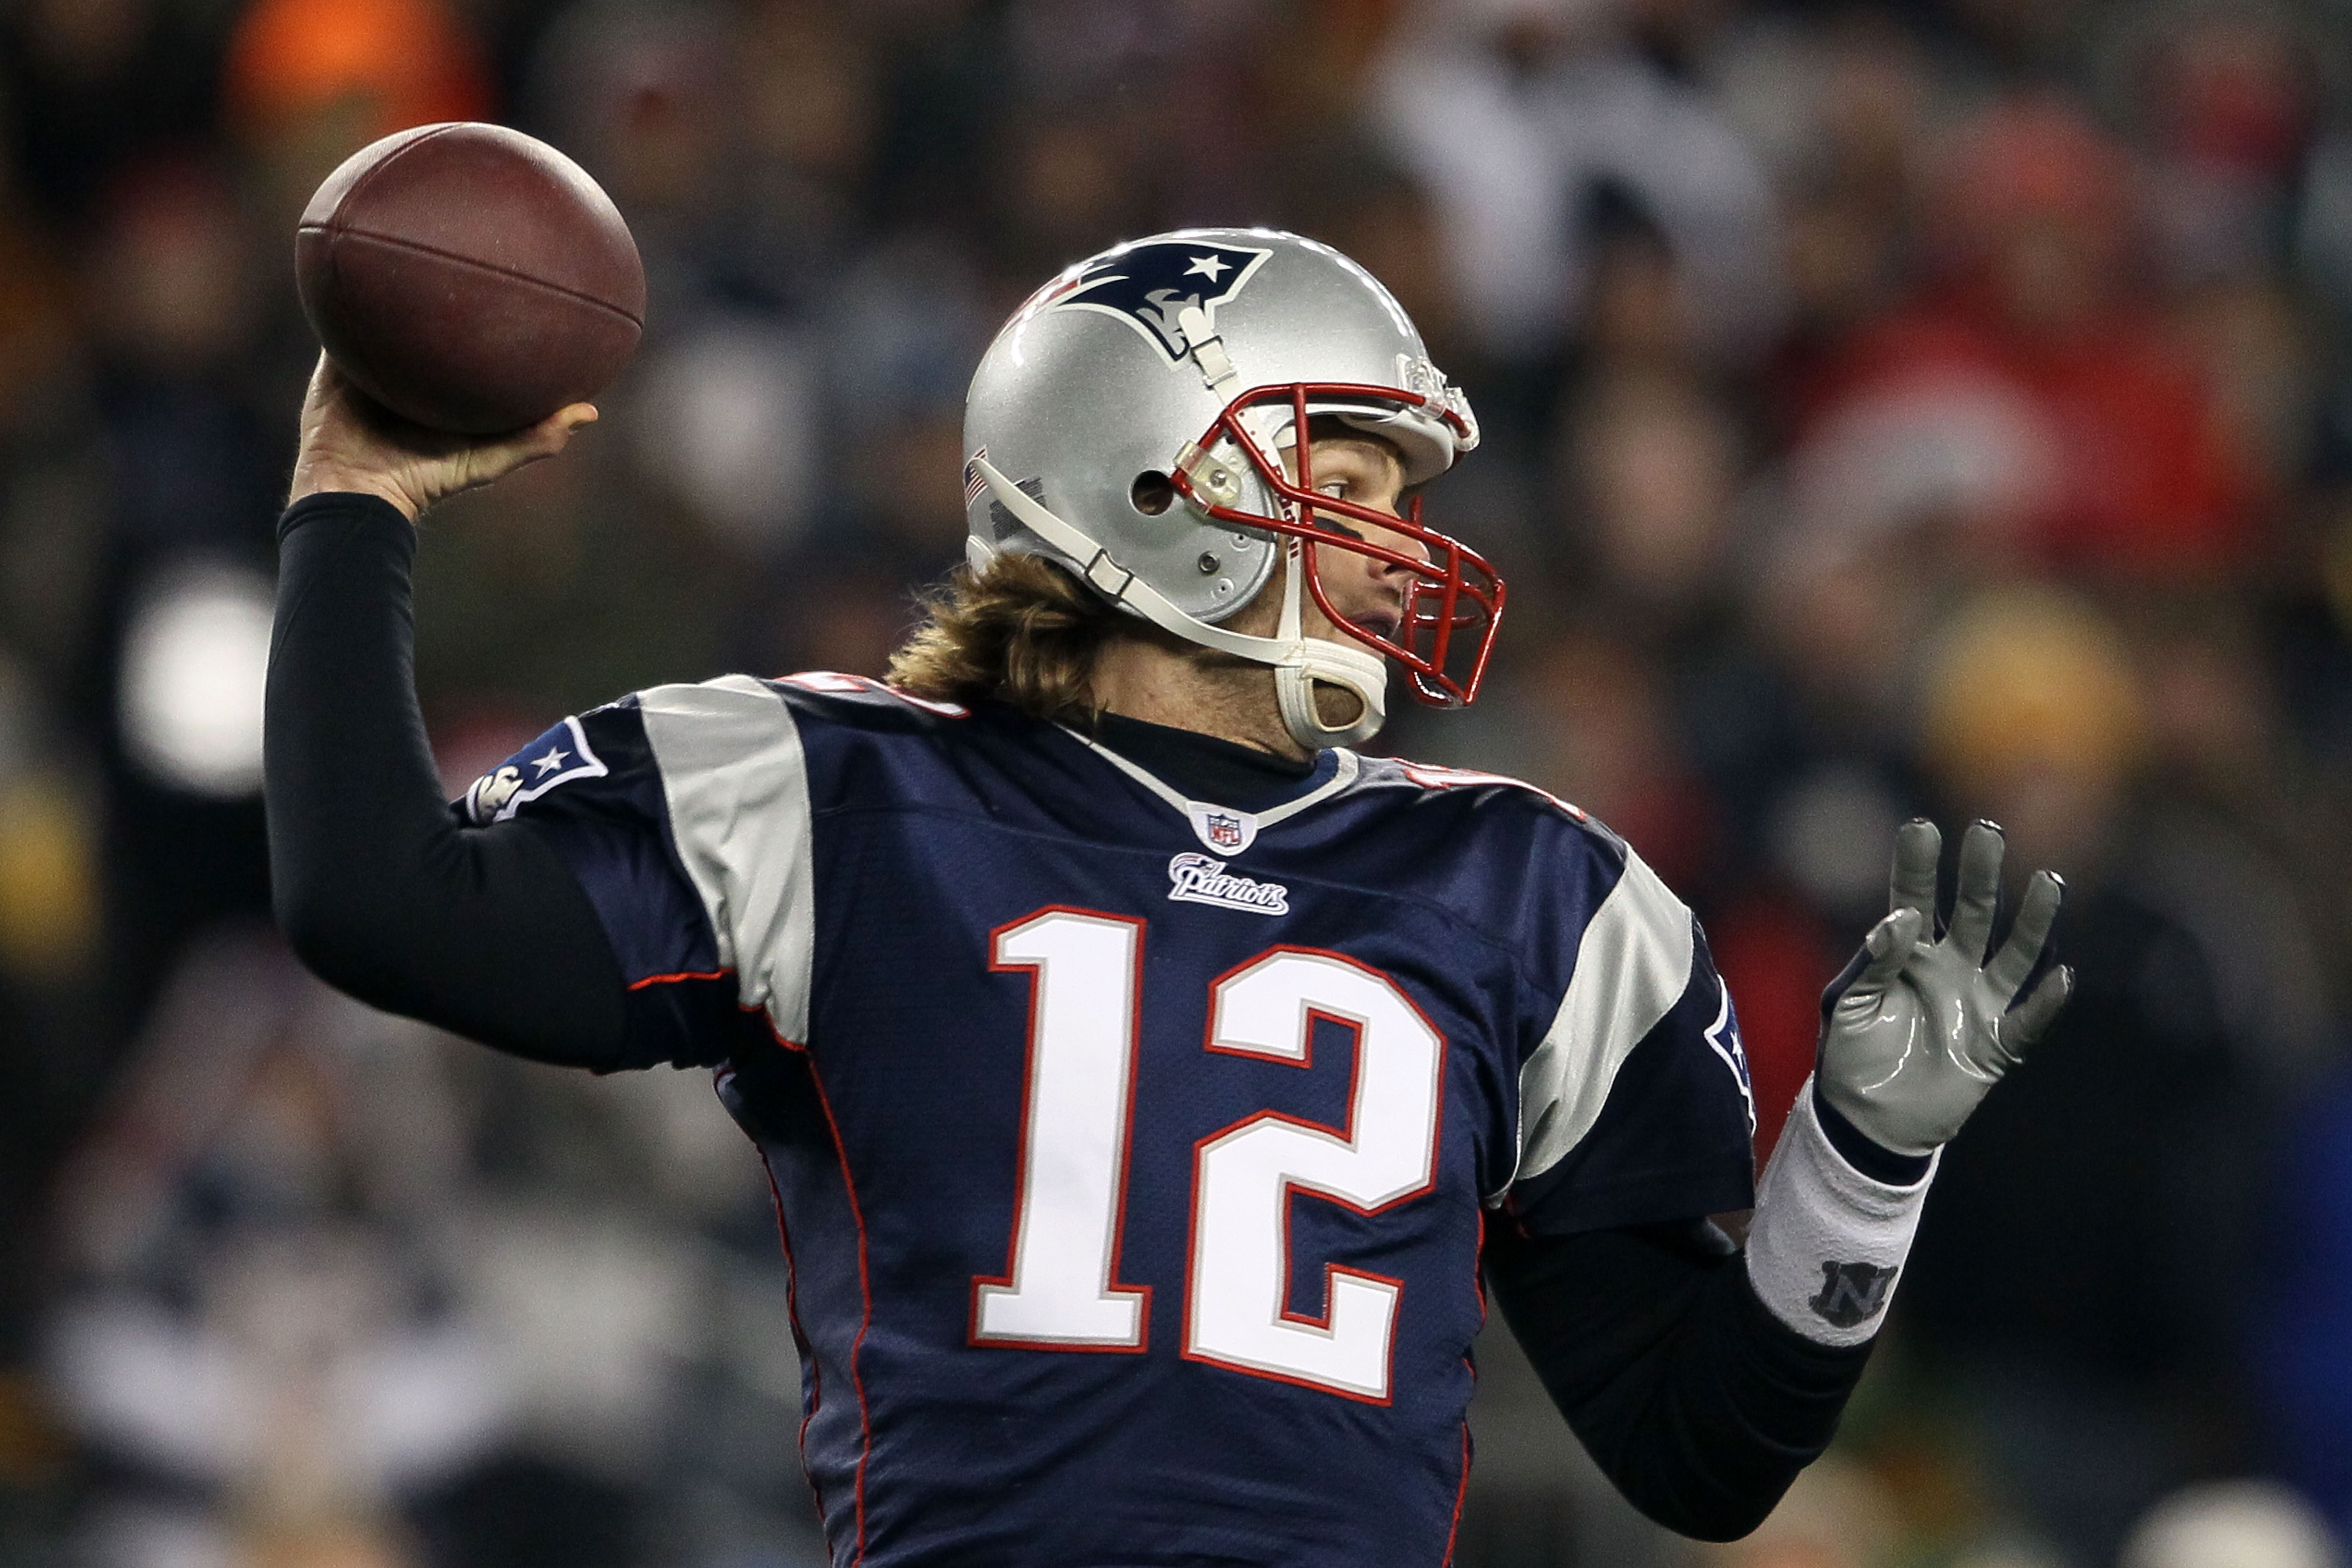 Pro Bowl Roster: Tom Brady and the Most Impressive Pro Bowlers at